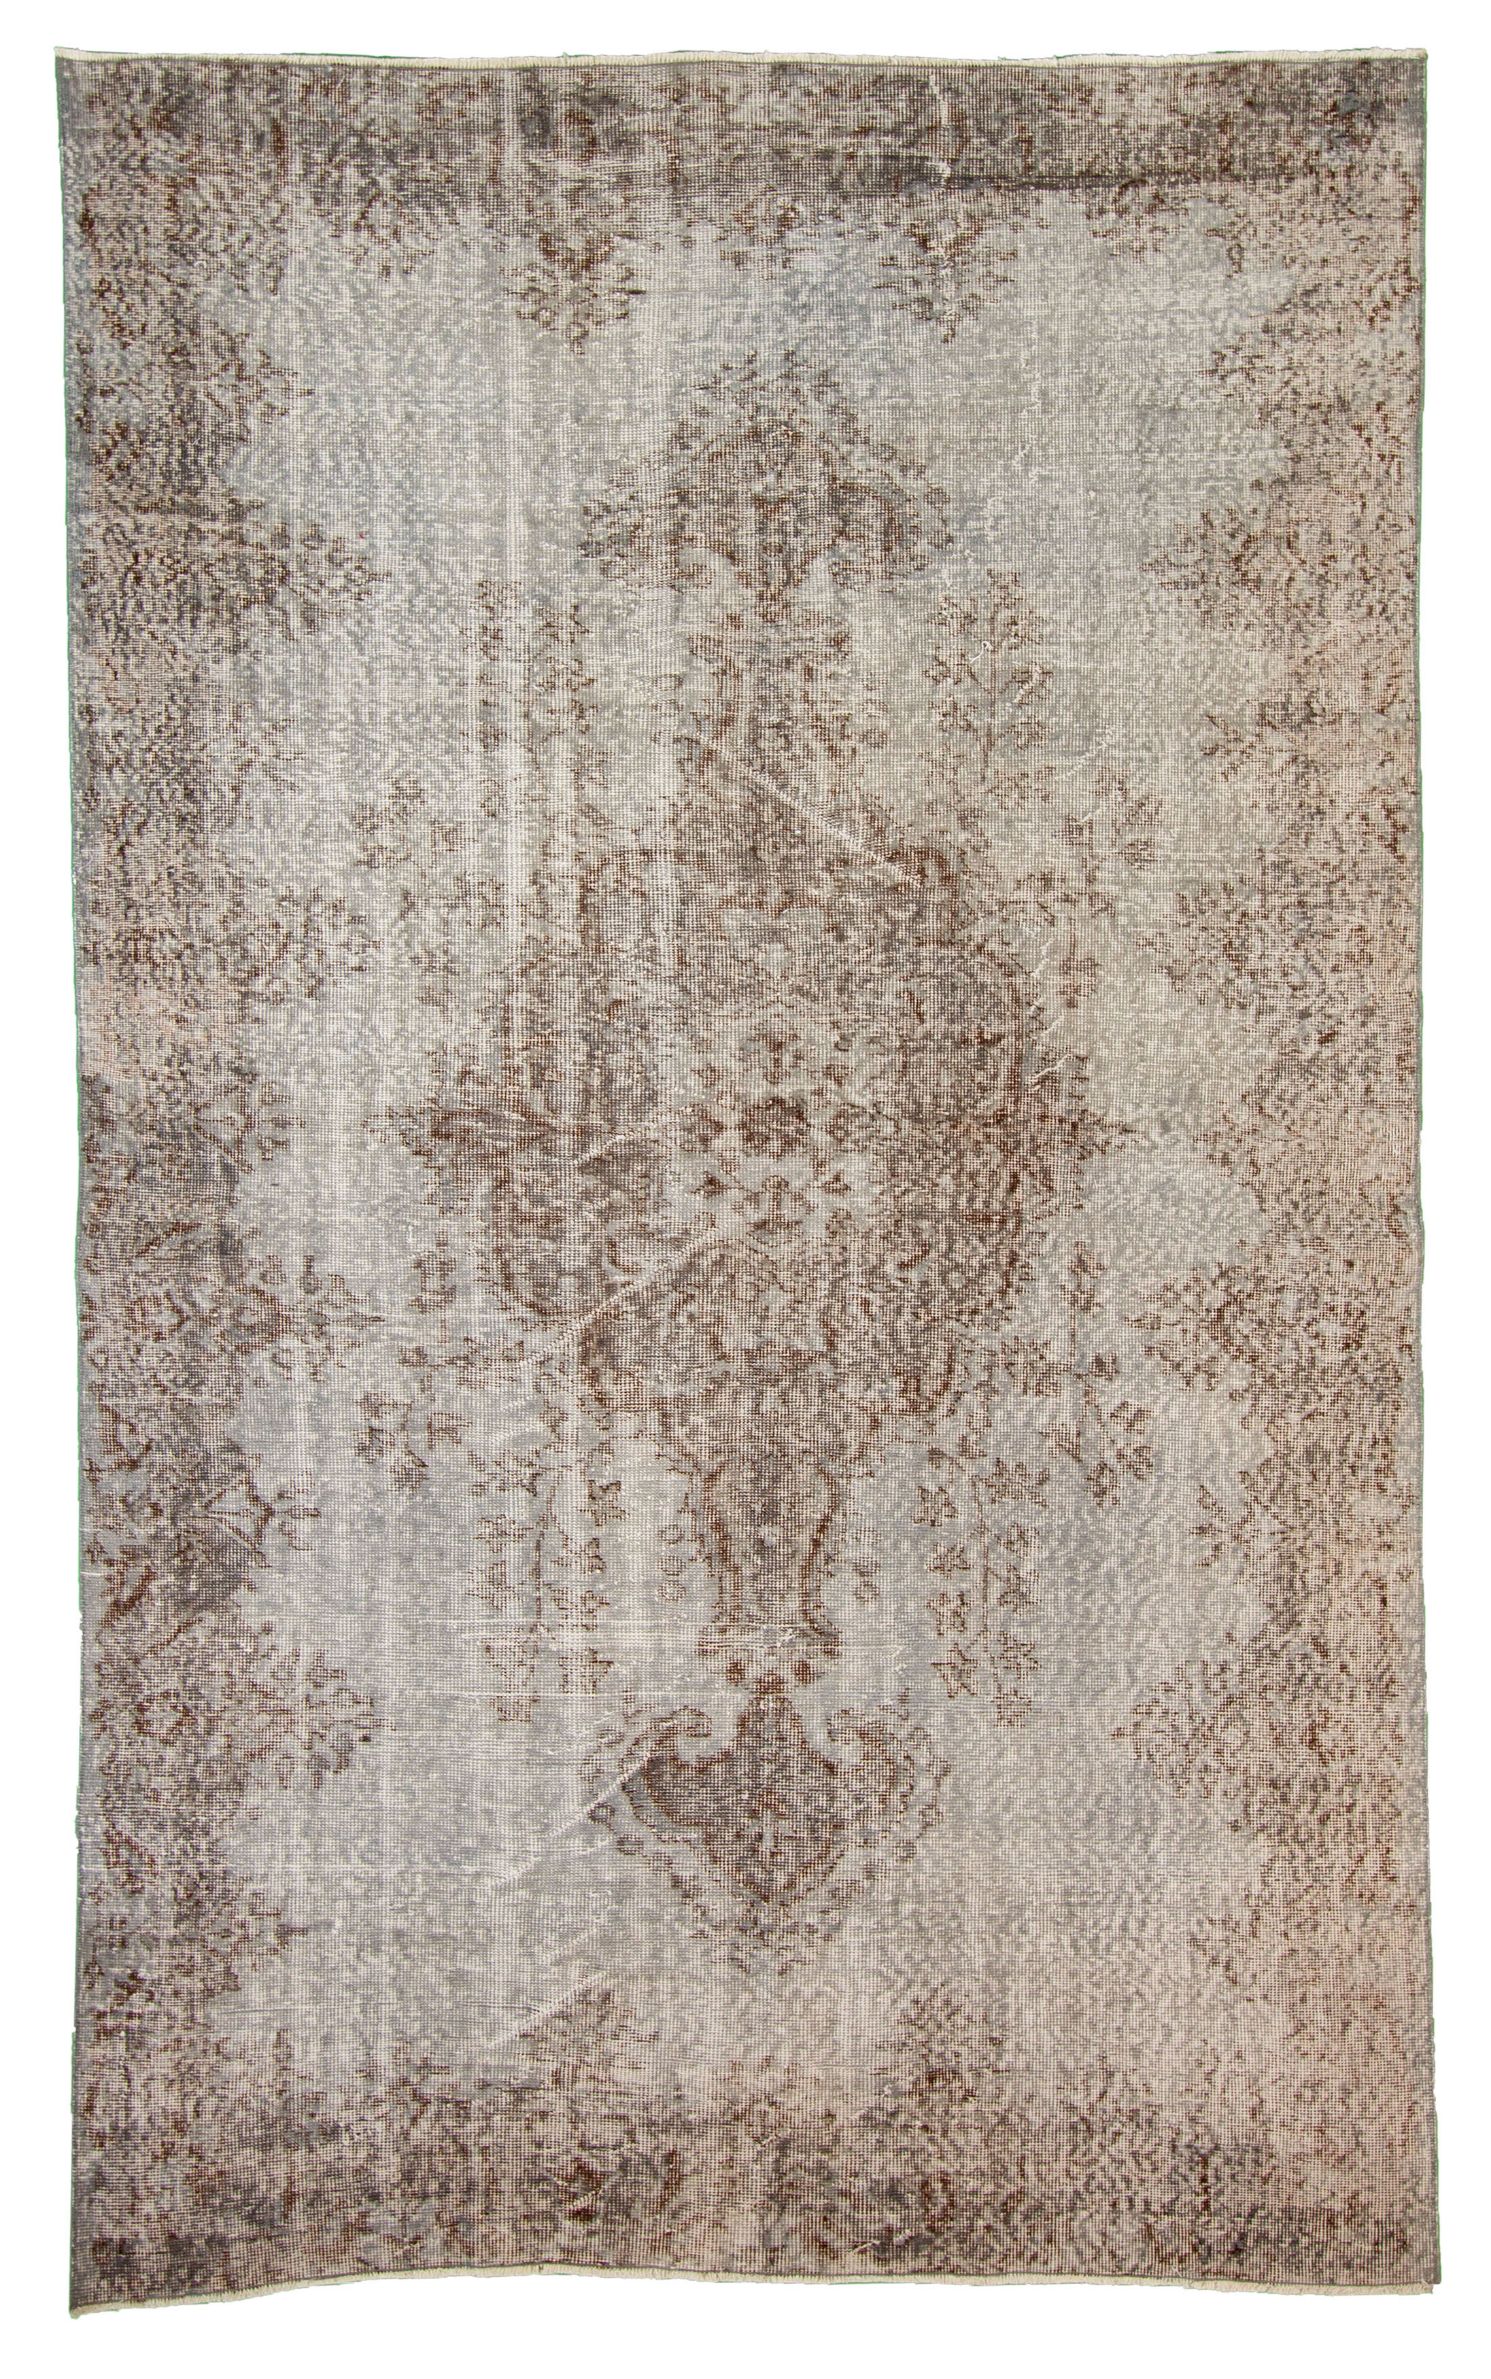 Hand-knotted Antalya Vintage   Rug 6'0" x 9'7"  Size: 6'0" x 9'7"  